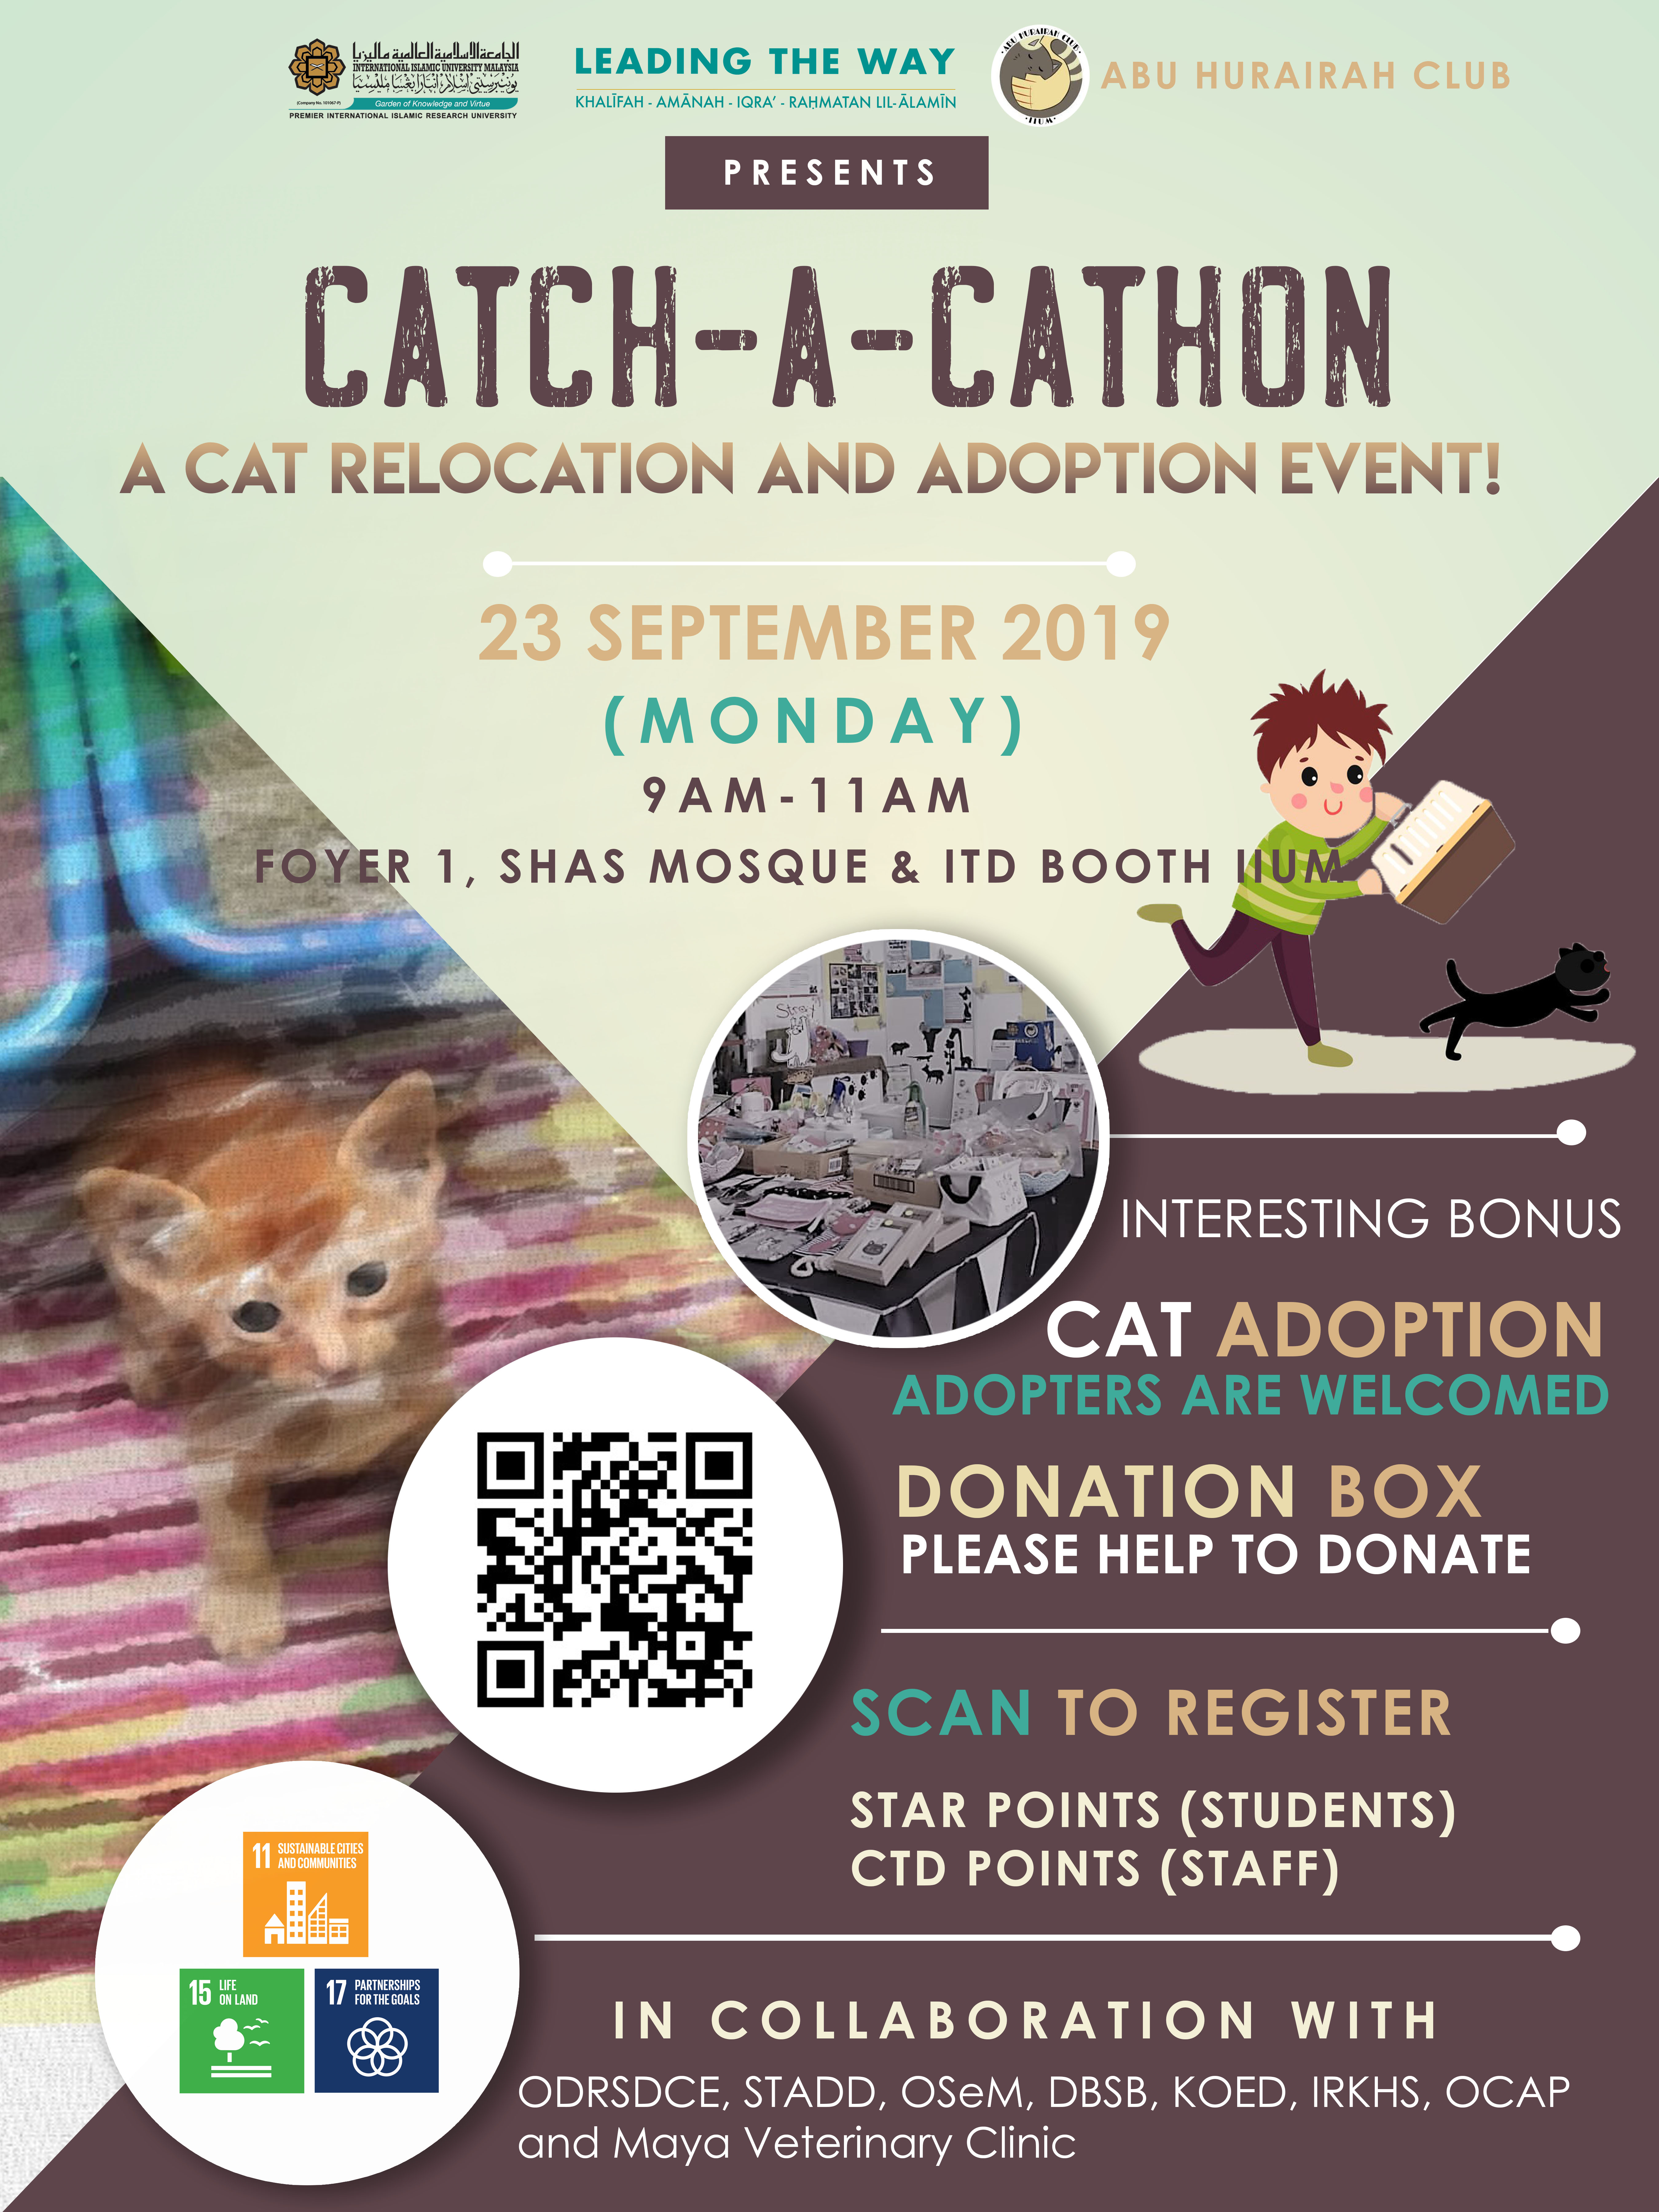 INVITATION TO ATTEND THE CATCH-A-CATHON RELOCATION AND CAT ADOPTION EVENT